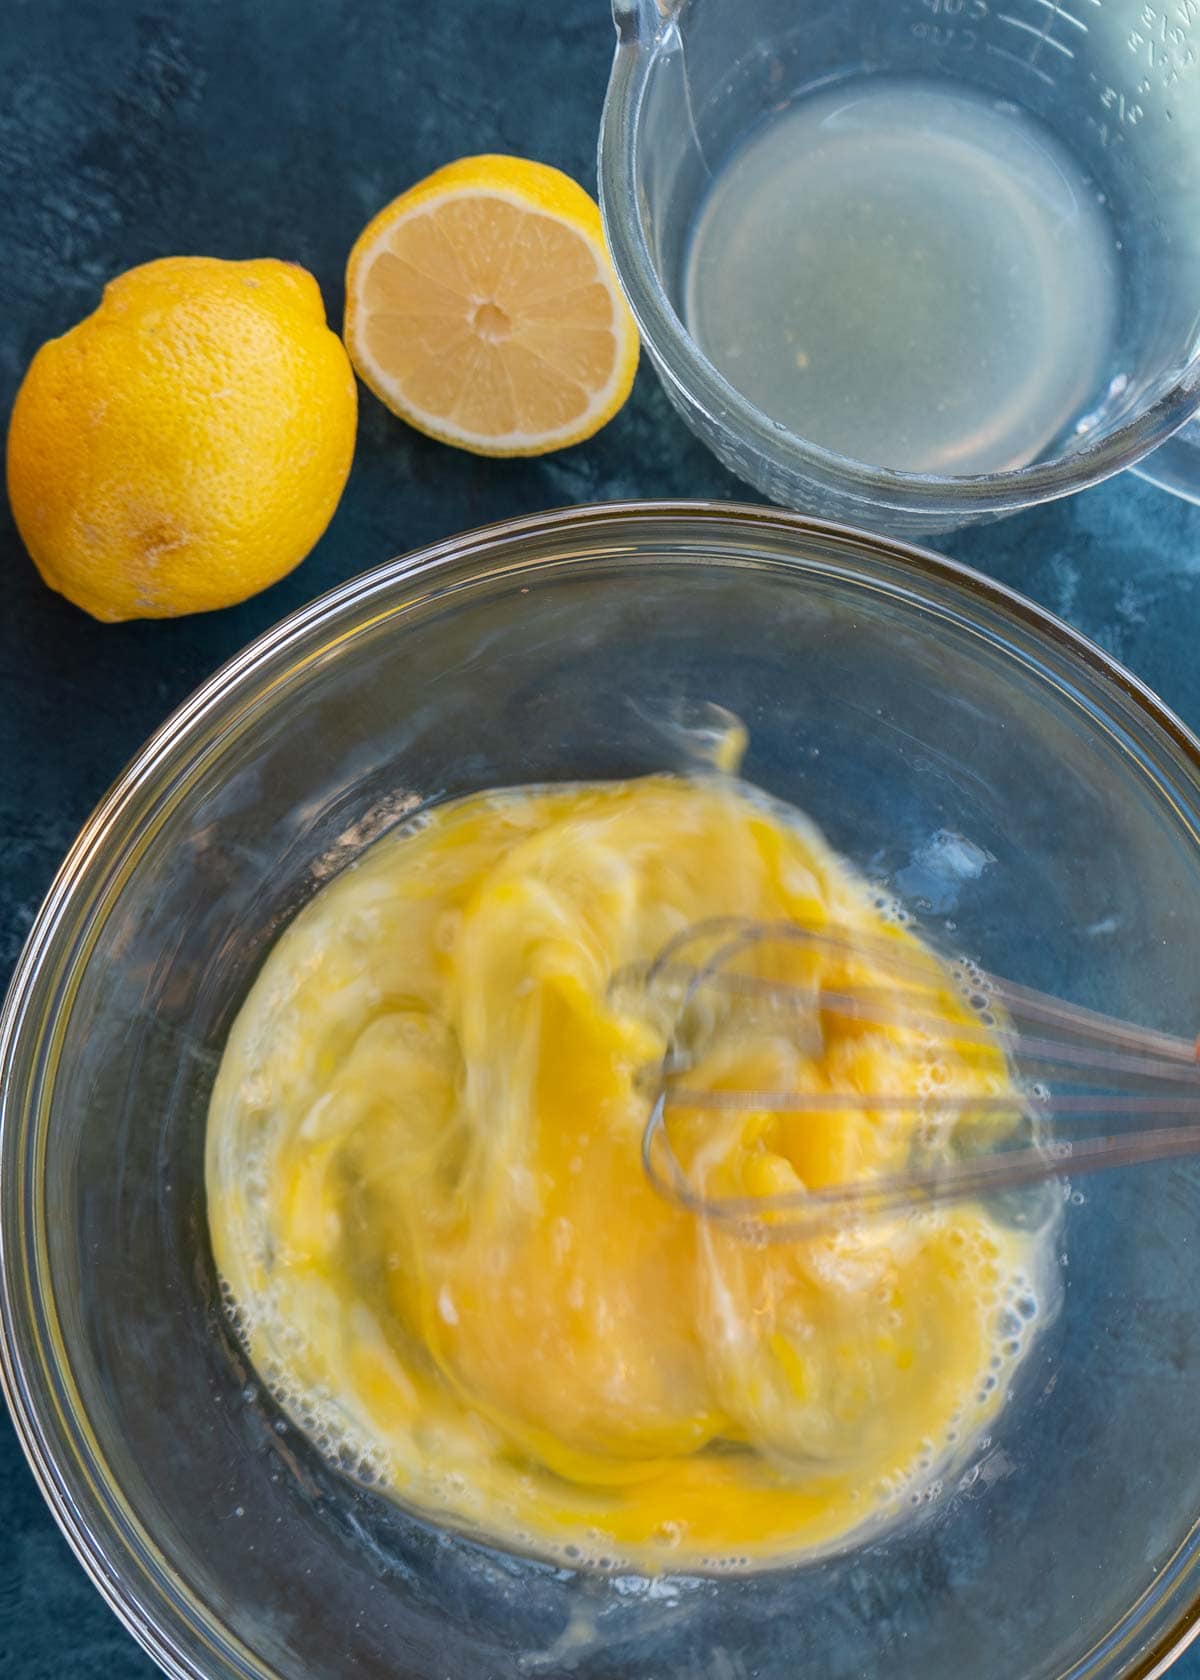 eggs and lemon juice being whisked in a bowl